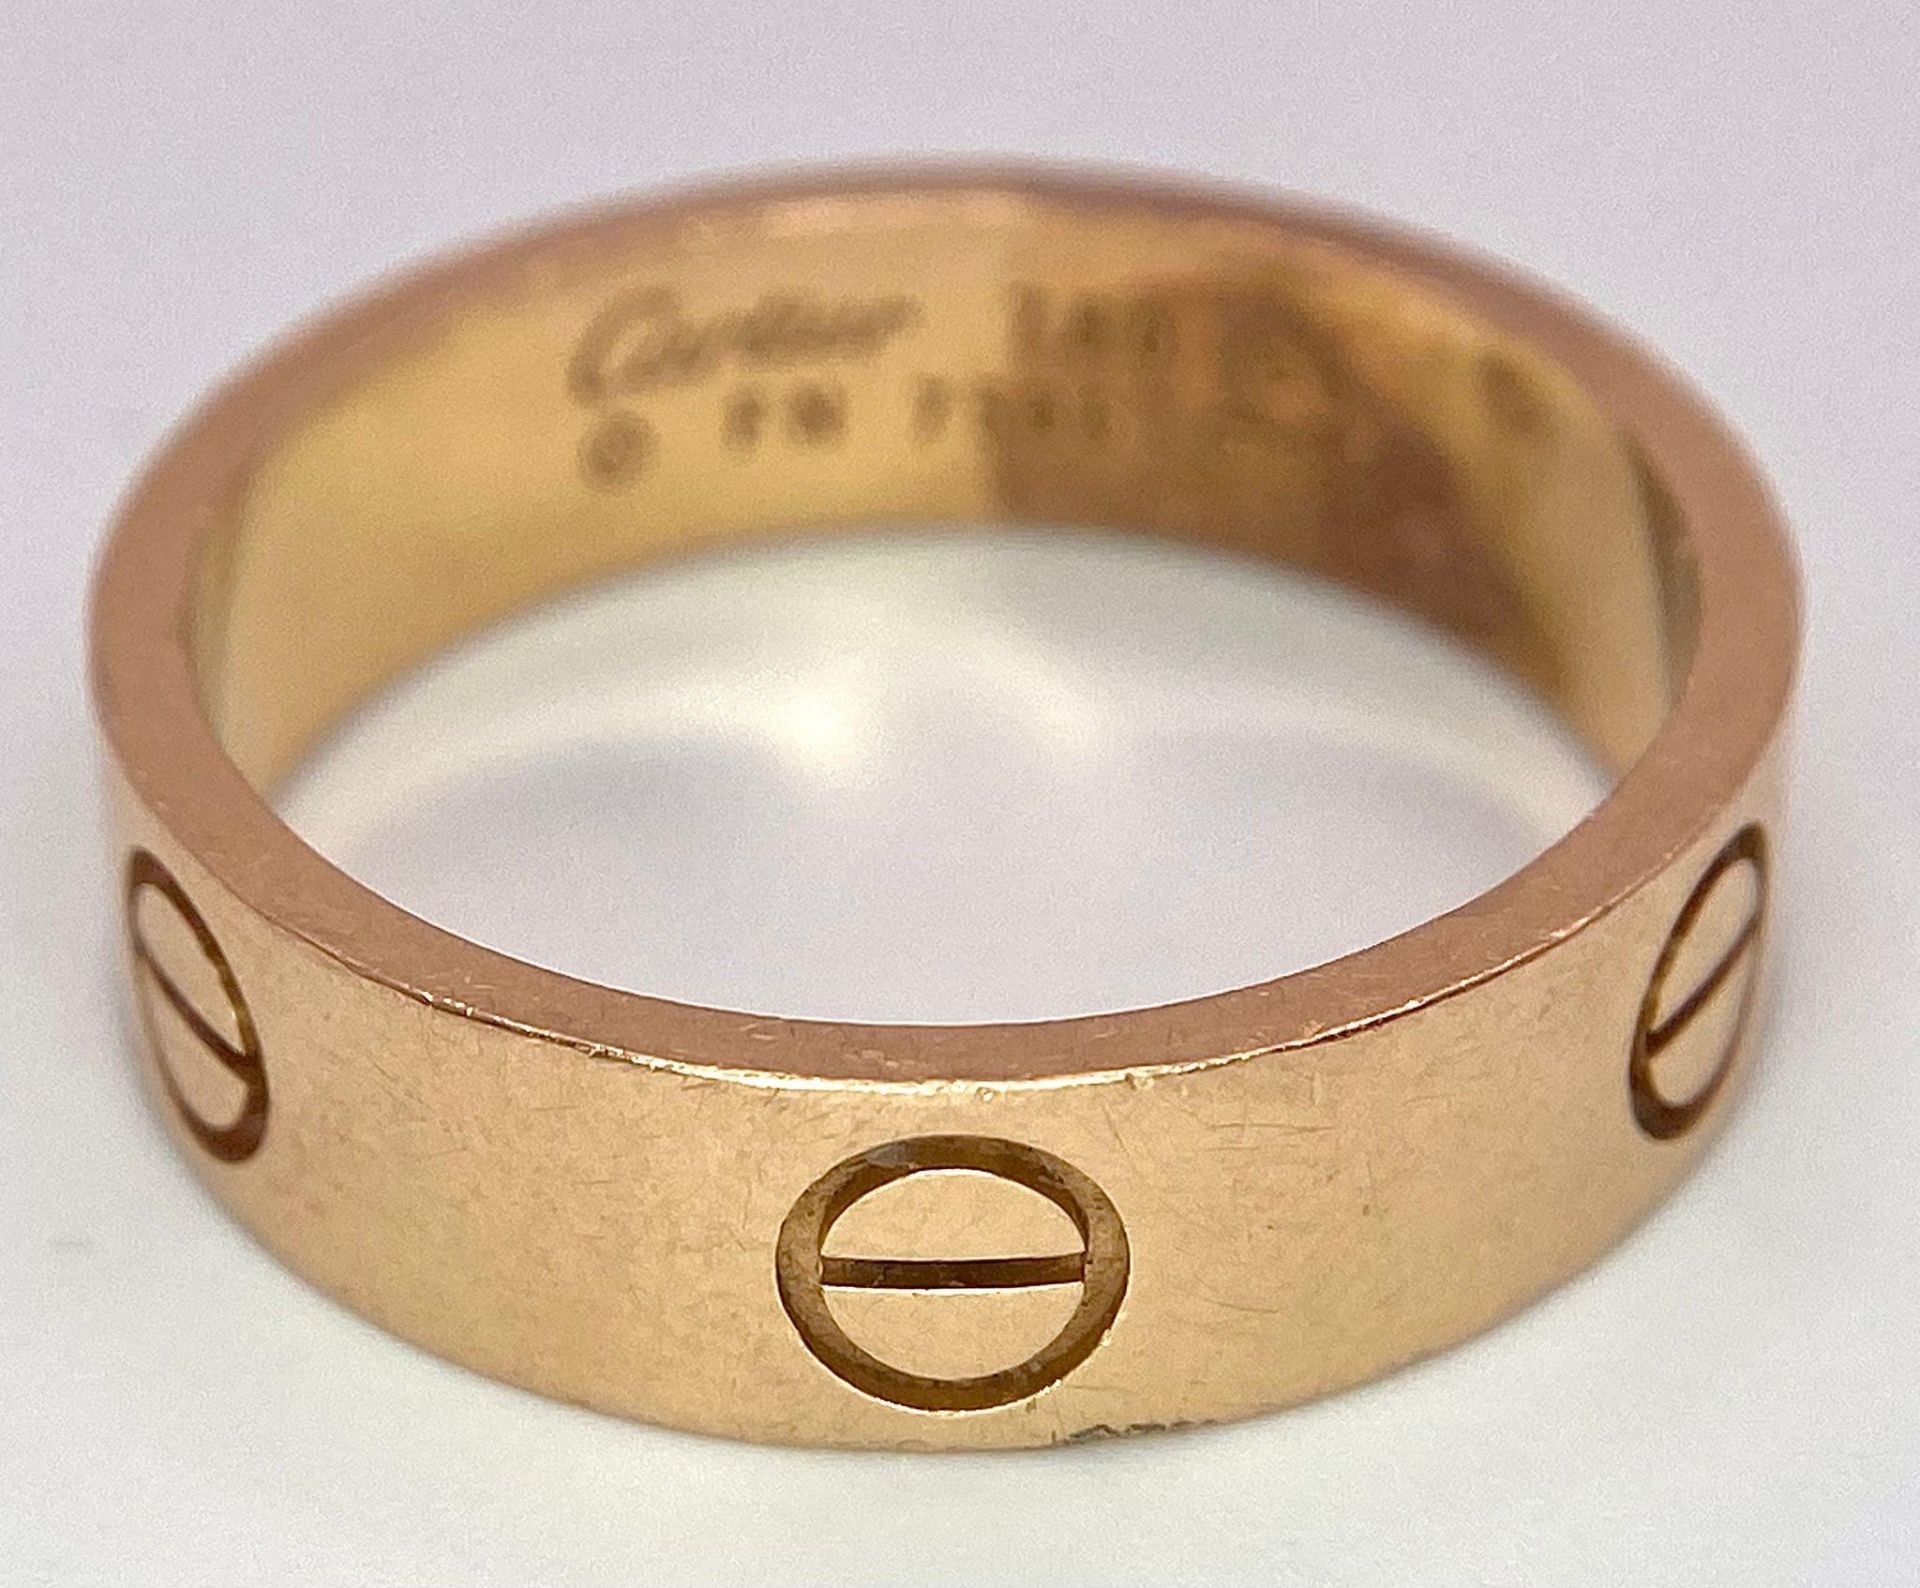 A Cartier 18K Rose Gold Love Band Gents Ring. 6mm width. Cartier hallmarks. Size W. 8.6g weight. - Image 4 of 9